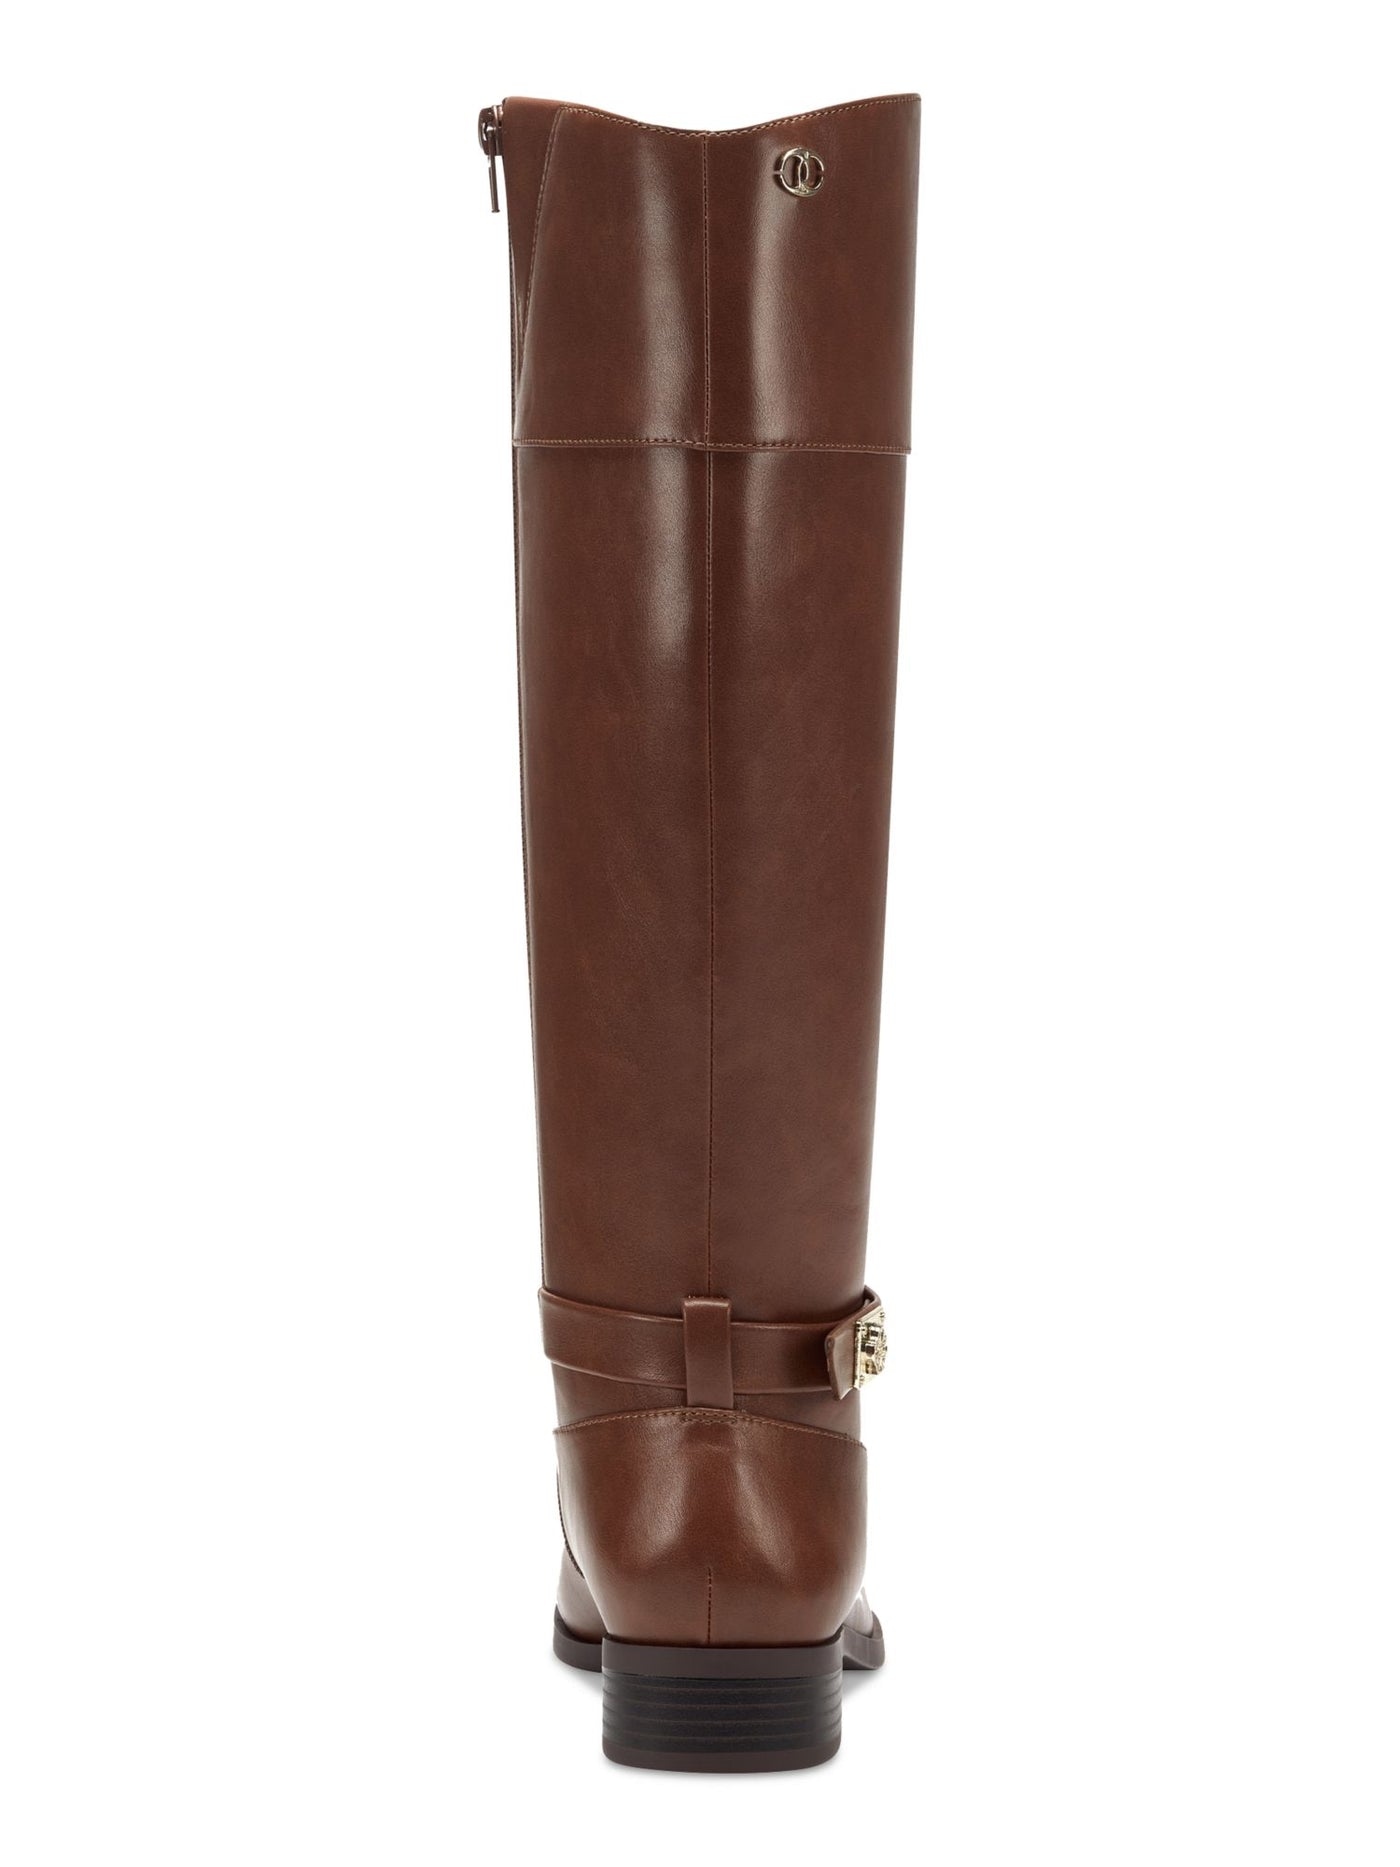 CHARTER CLUB Womens Brown Buckle Accent Johannes Round Toe Zip-Up Riding Boot 5 M